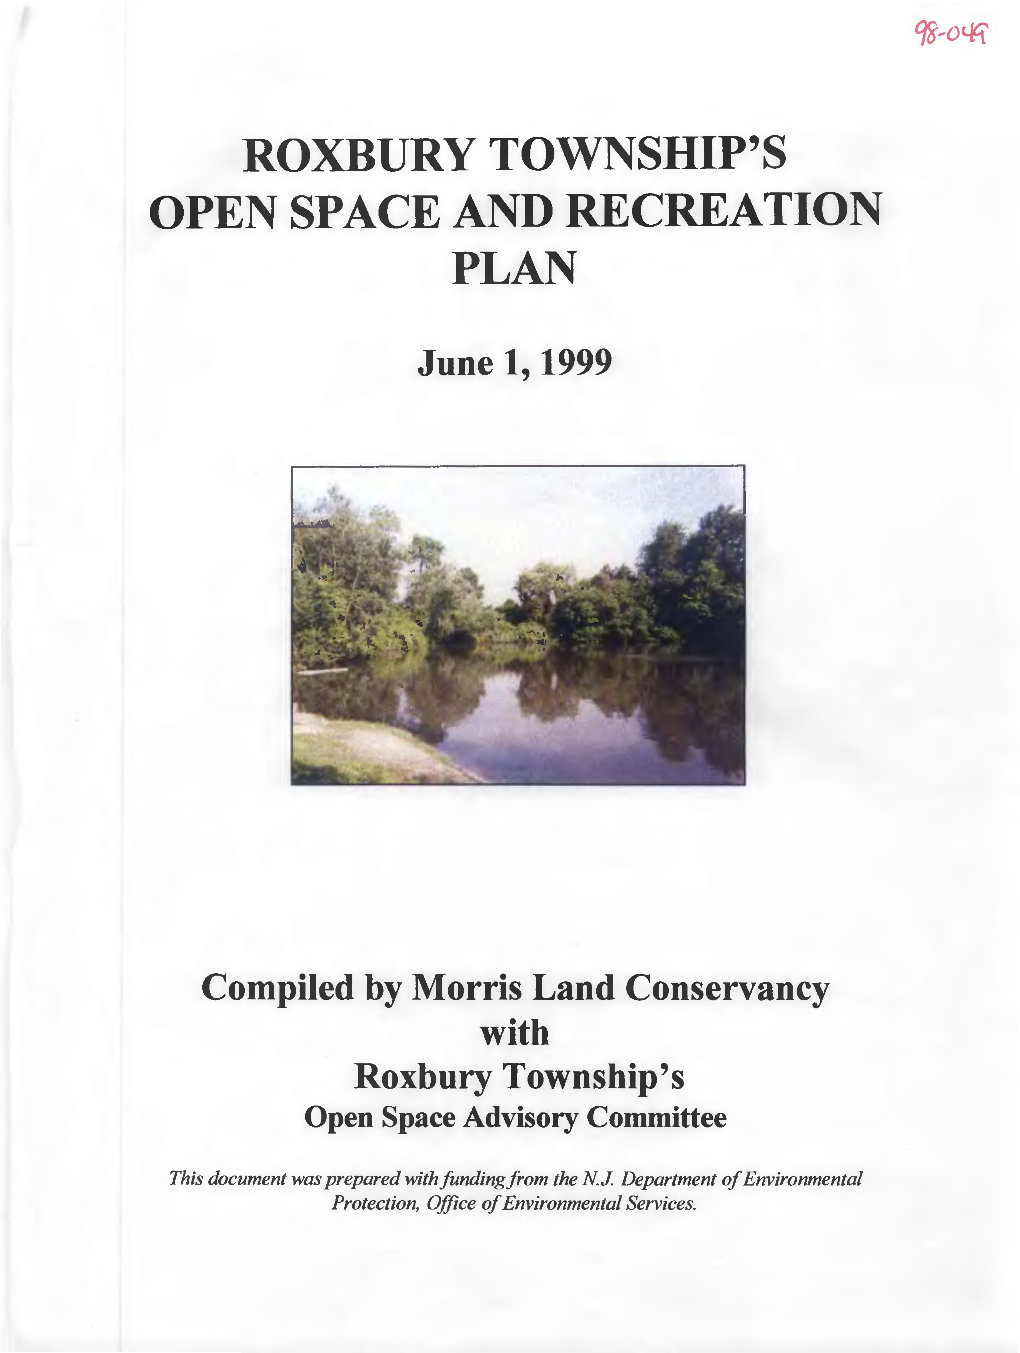 Roxbury Township's Open Space and Recreation Plan